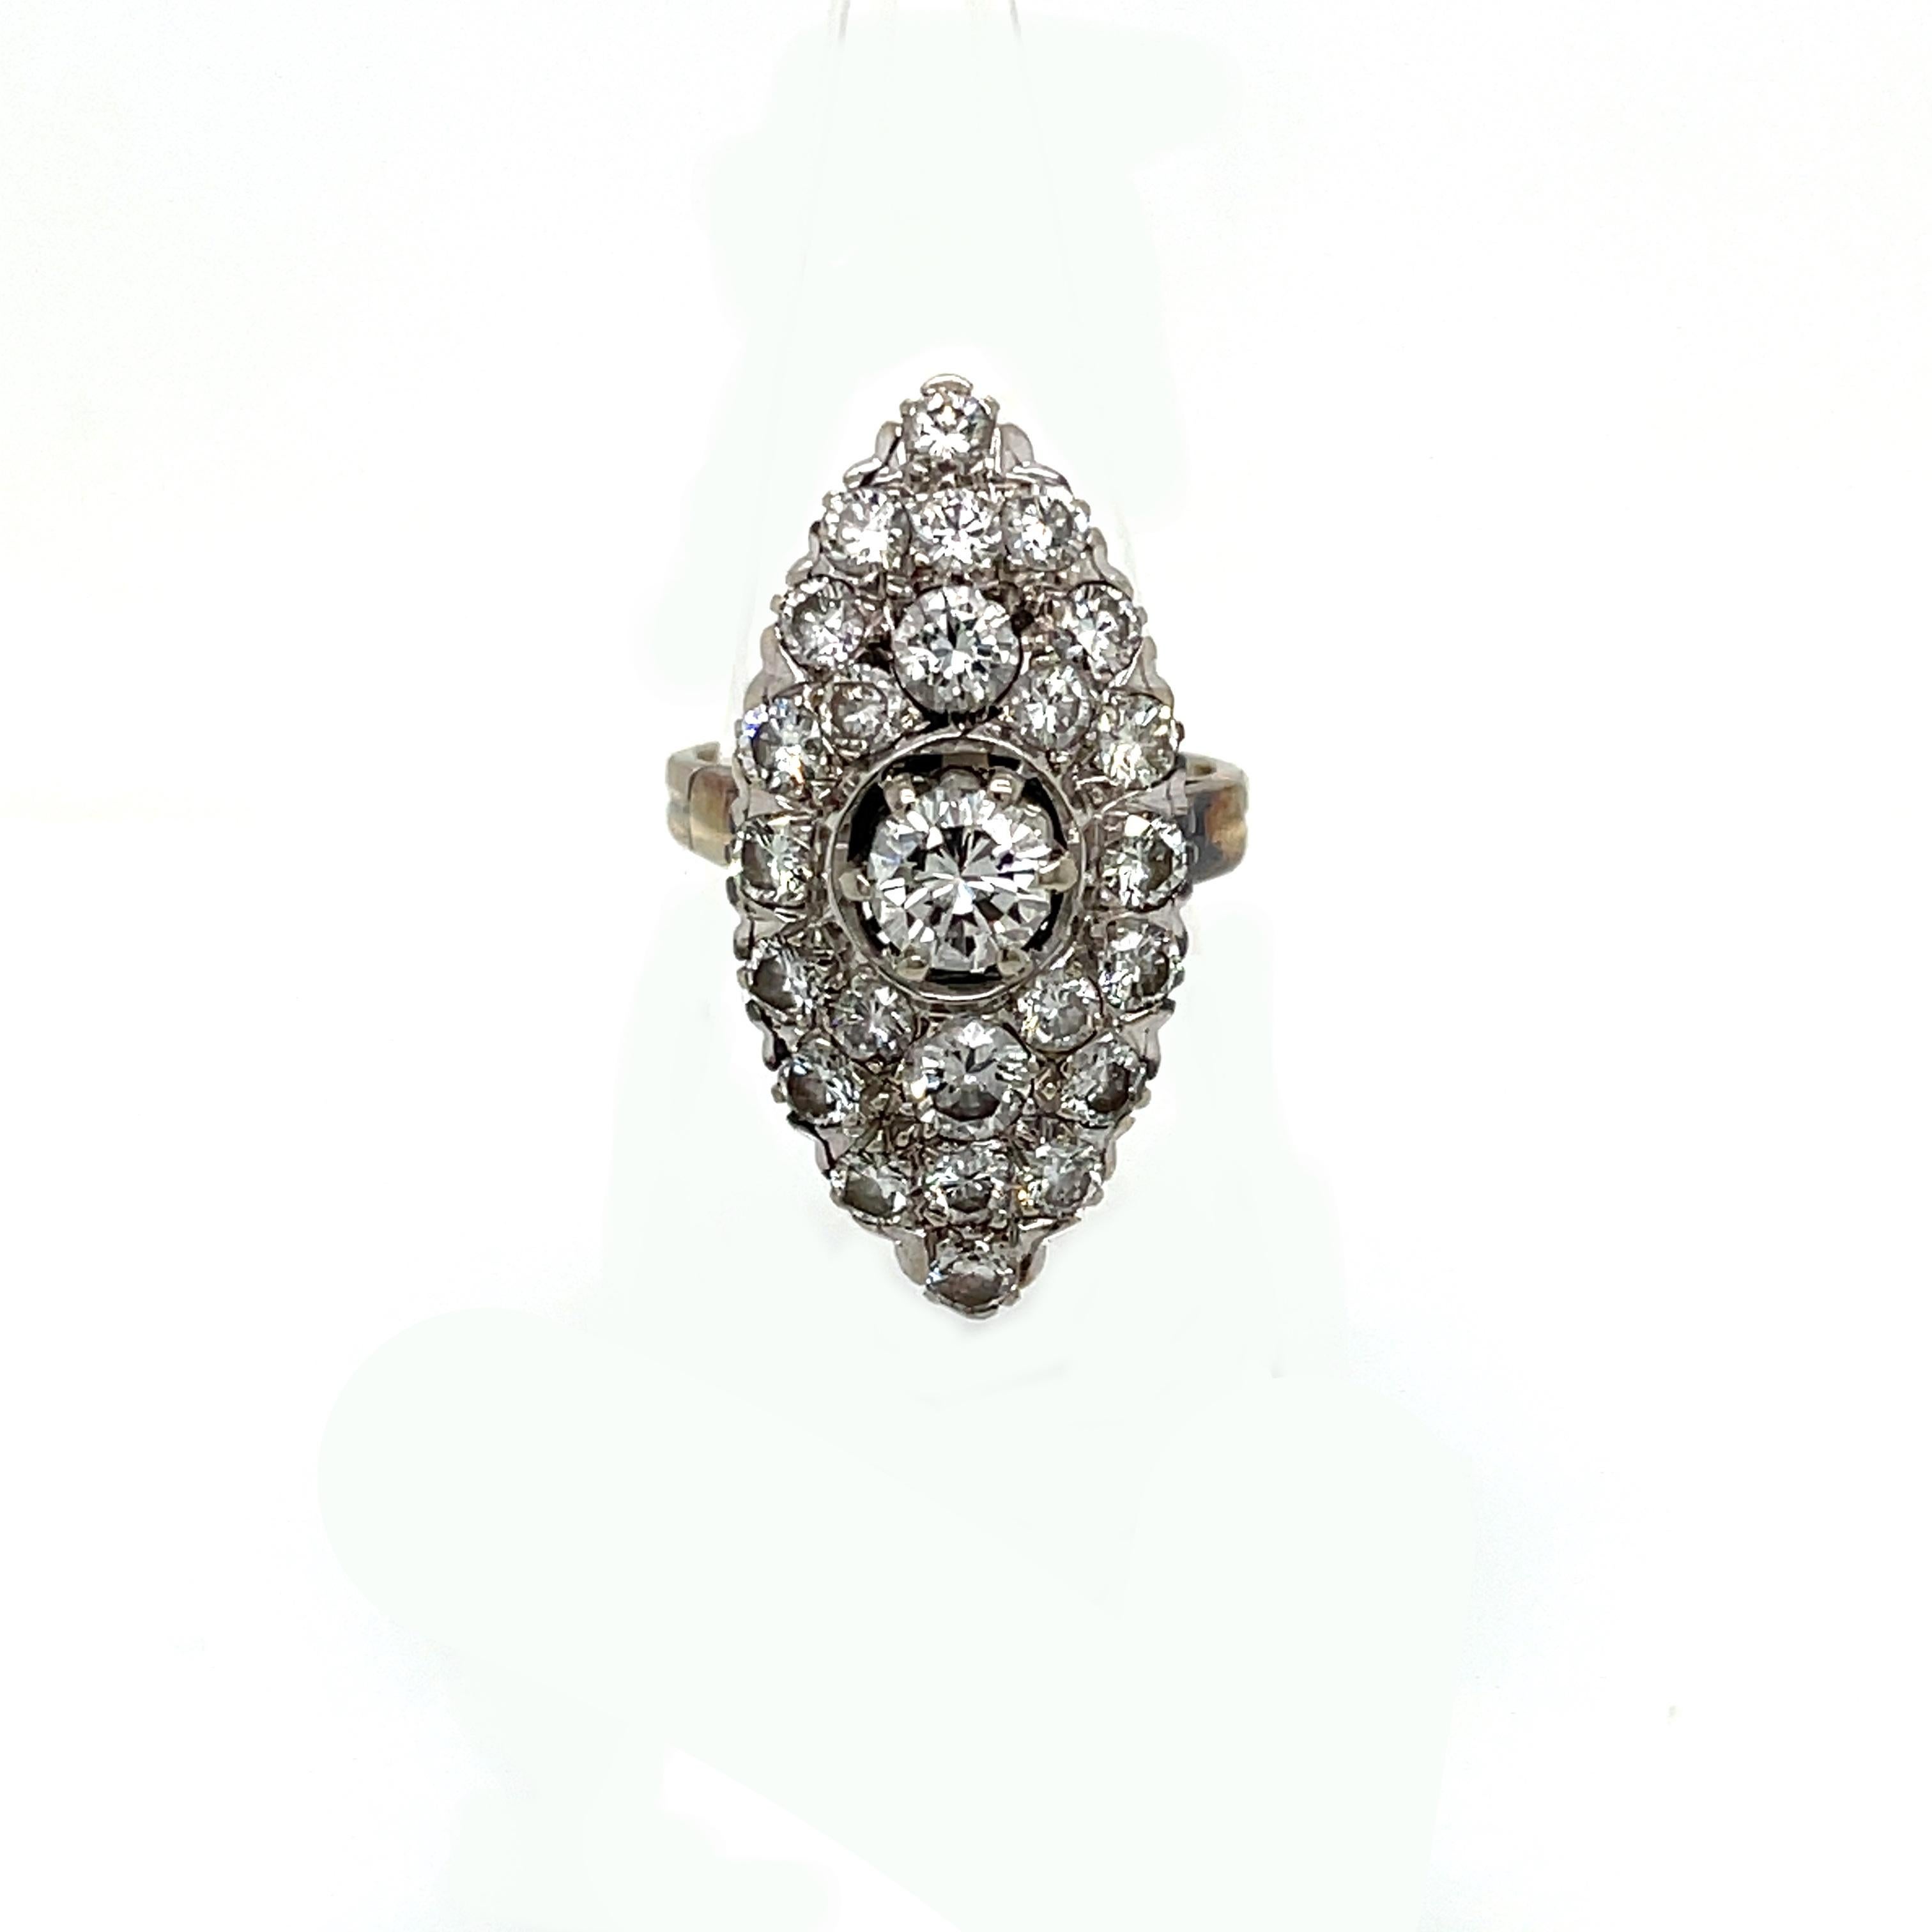 Beautiful 18k Gold handmade genuine Belle Époque ring.
It features two rows of Old European Cut diamond, total weight 1,80 ct. graded VS clarity G/H color, and in the center a sparkling Old European Cut diamond, weight ct 0,50 graded VS clarity G